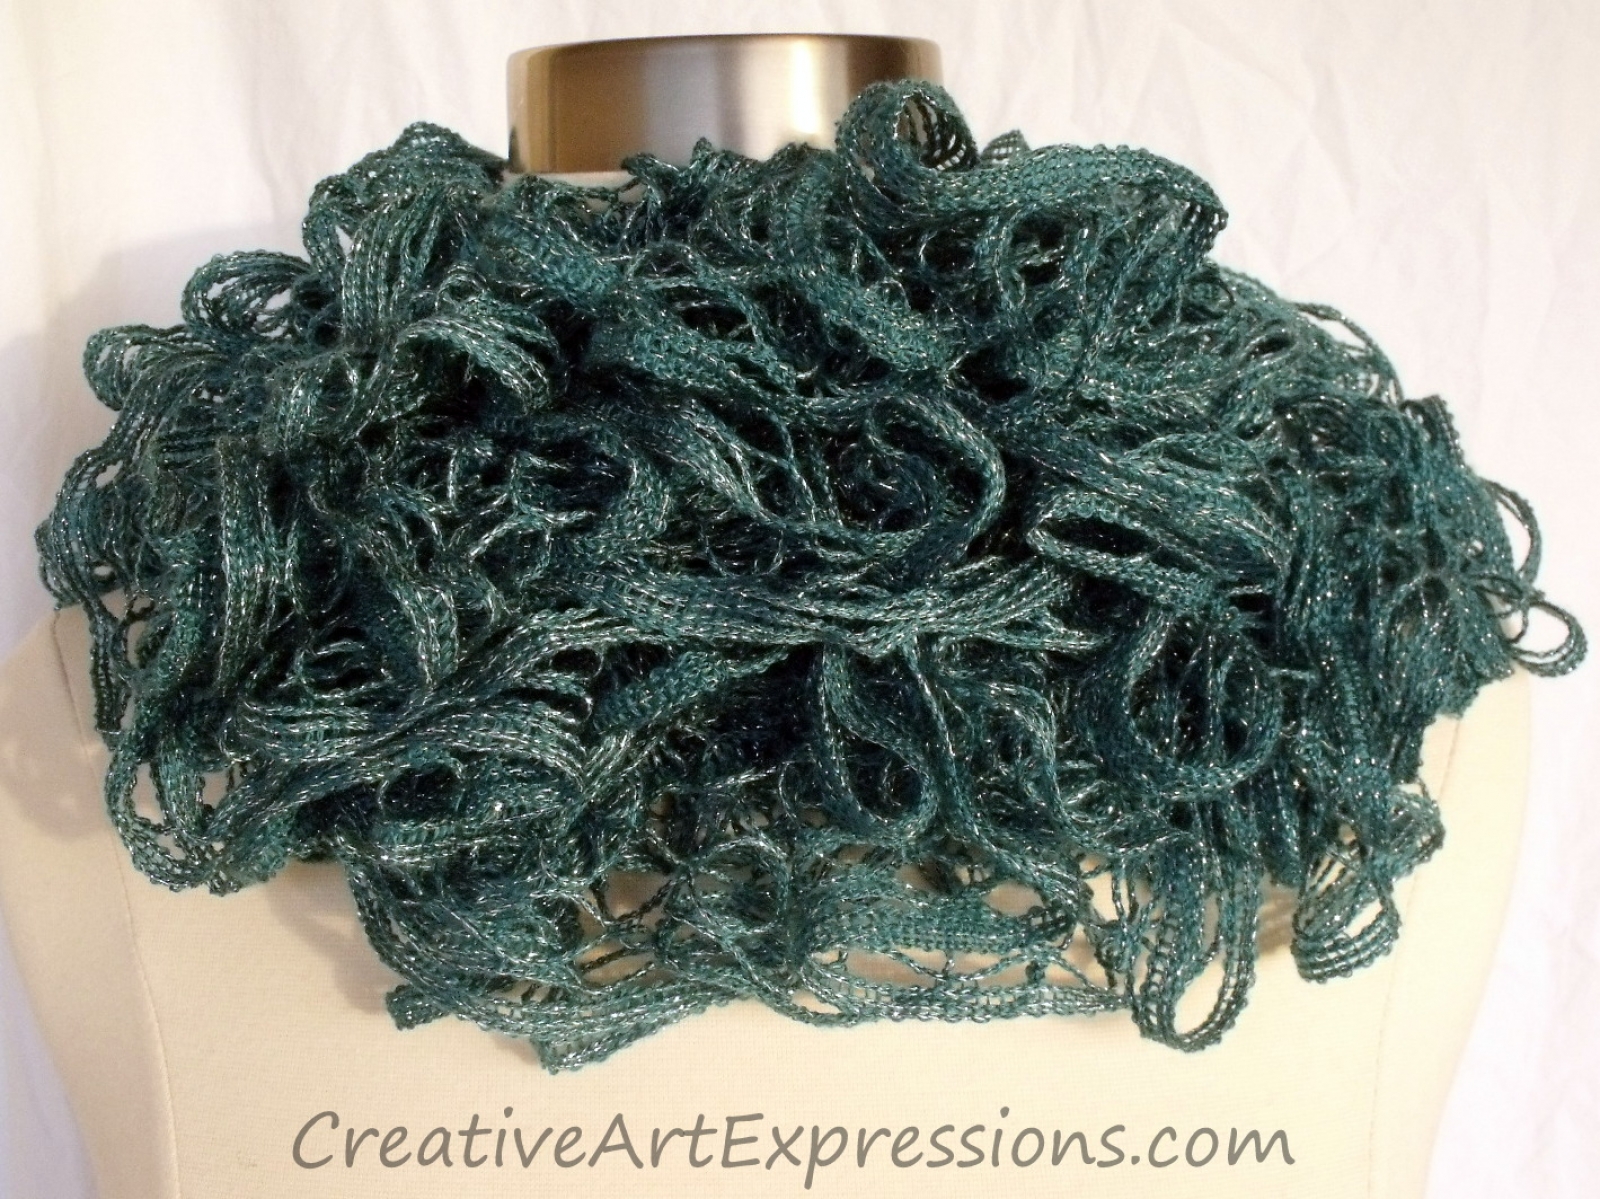 Creative Art Expressions Hand Knitted Persian Blue Ruffle Scarf ...